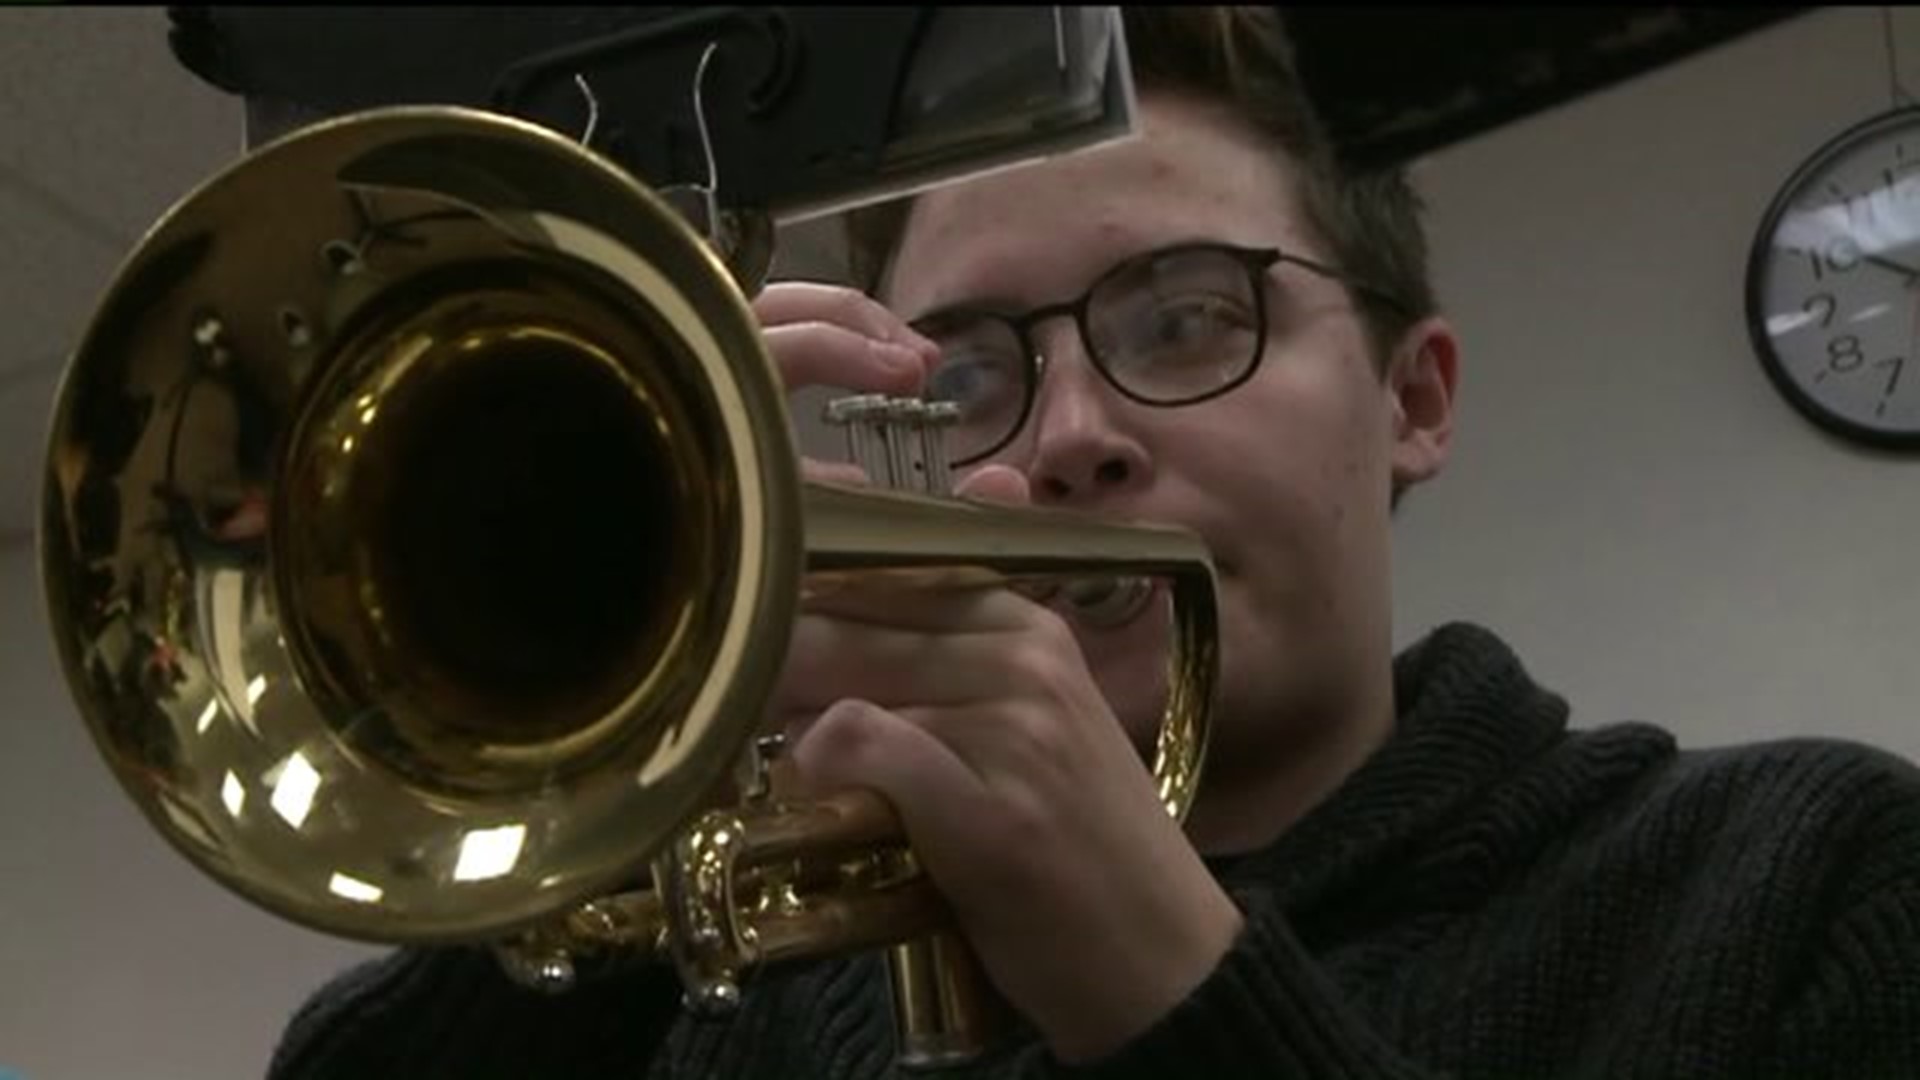 High School Band to Perform During Inauguration Celebration